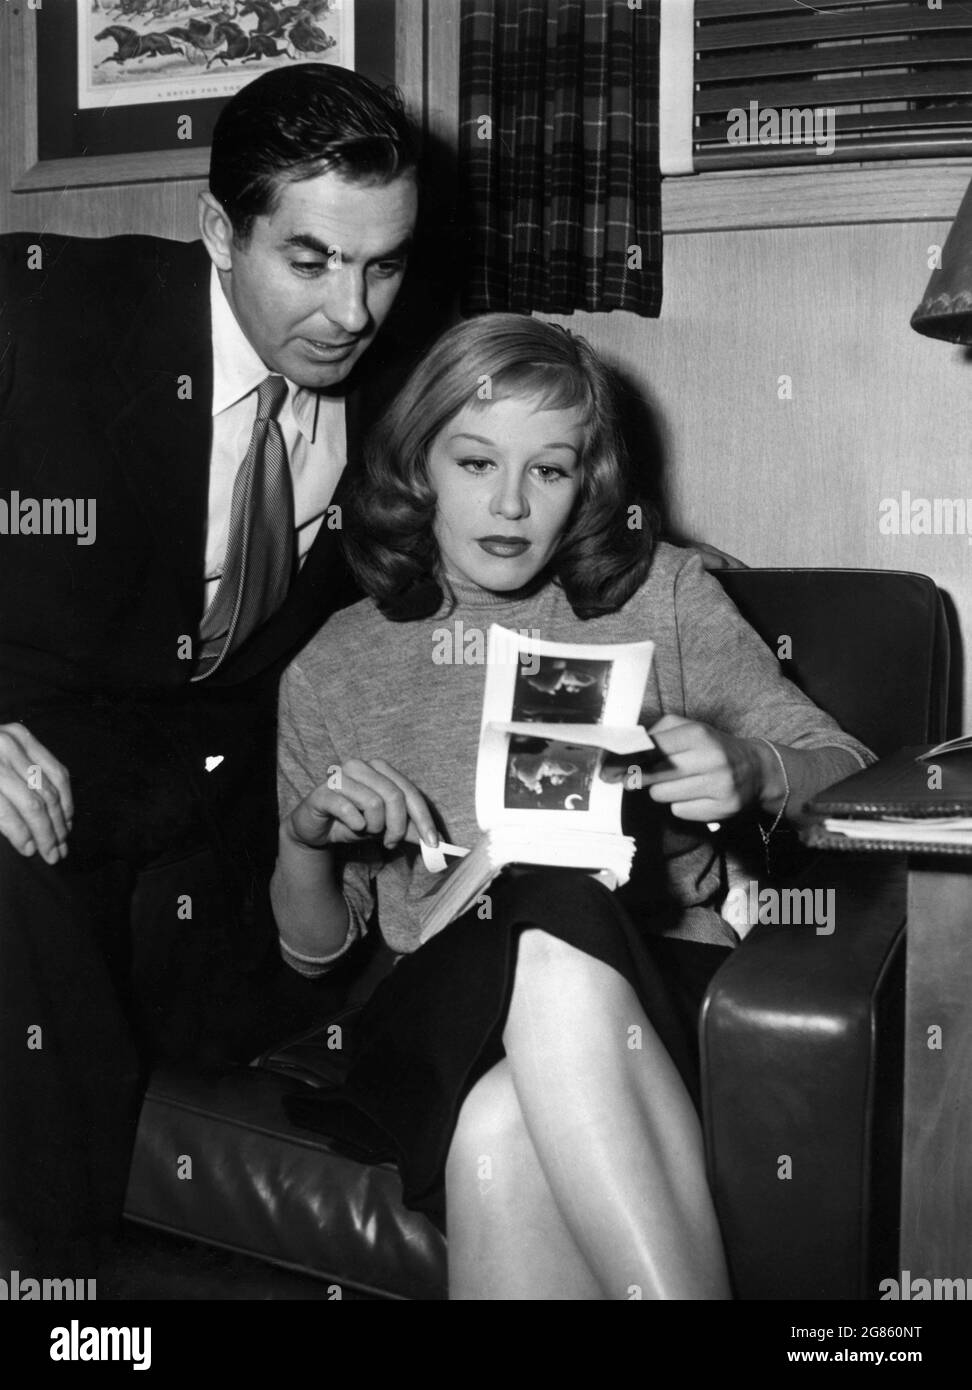 TYRONE POWER and HILDEGARD KNEF on set candid checking proof contact prints of publicity stills during filming of DIPLOMATIC COURIER 1952 director HENRY HATHAWAY from novel Sinister Errand by Peter Cheyney Twentieth Century Fox Stock Photo